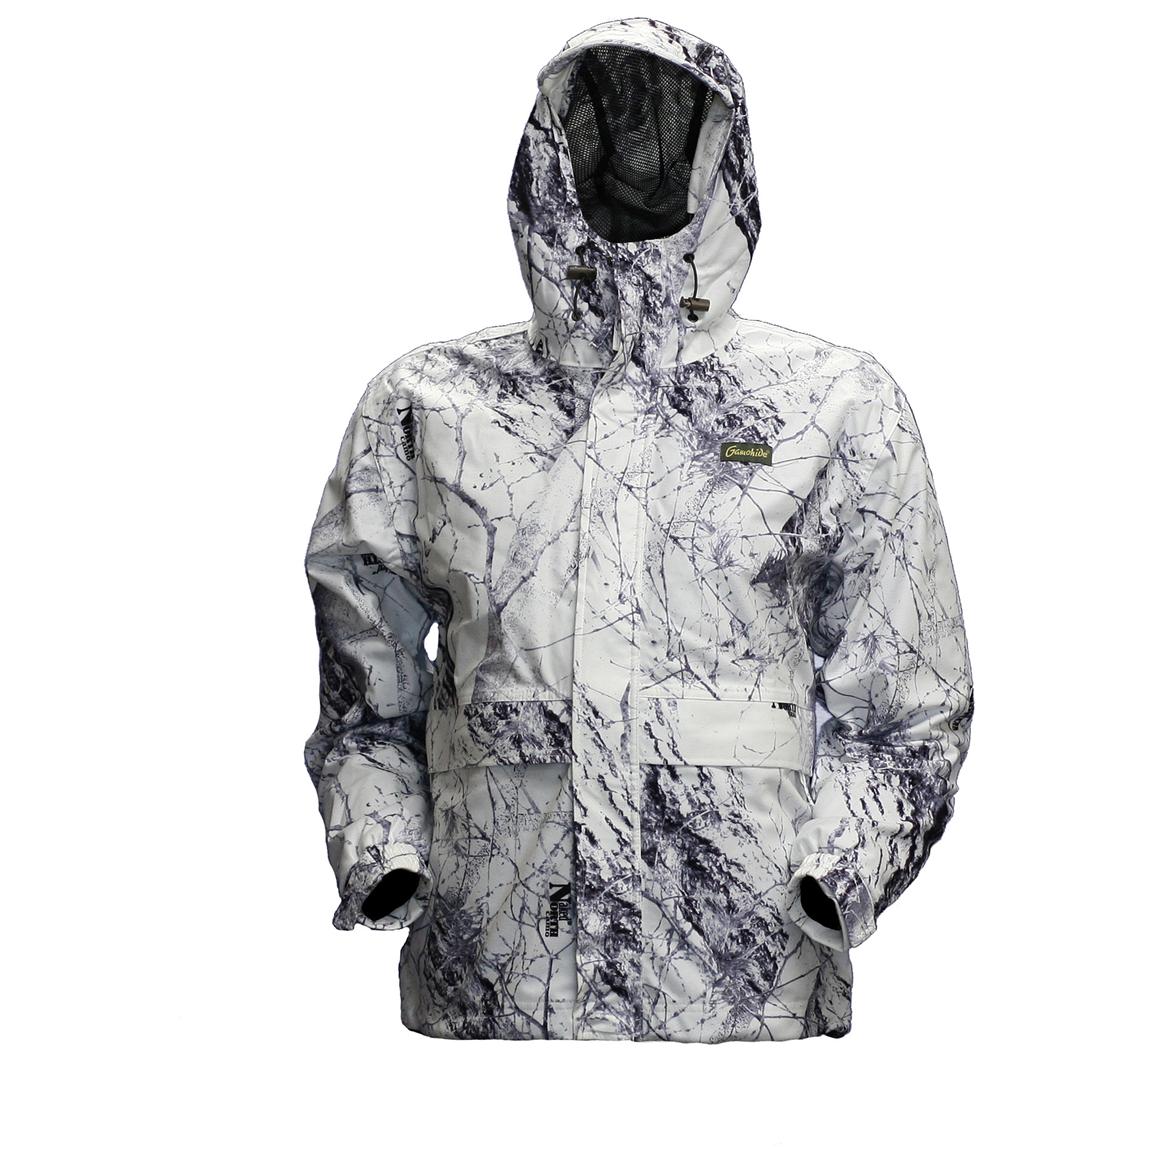 Gamehide® Trail's End Jacket, Naked North Snow Camo 425420, Camo Jackets at 365 Outdoor Wear